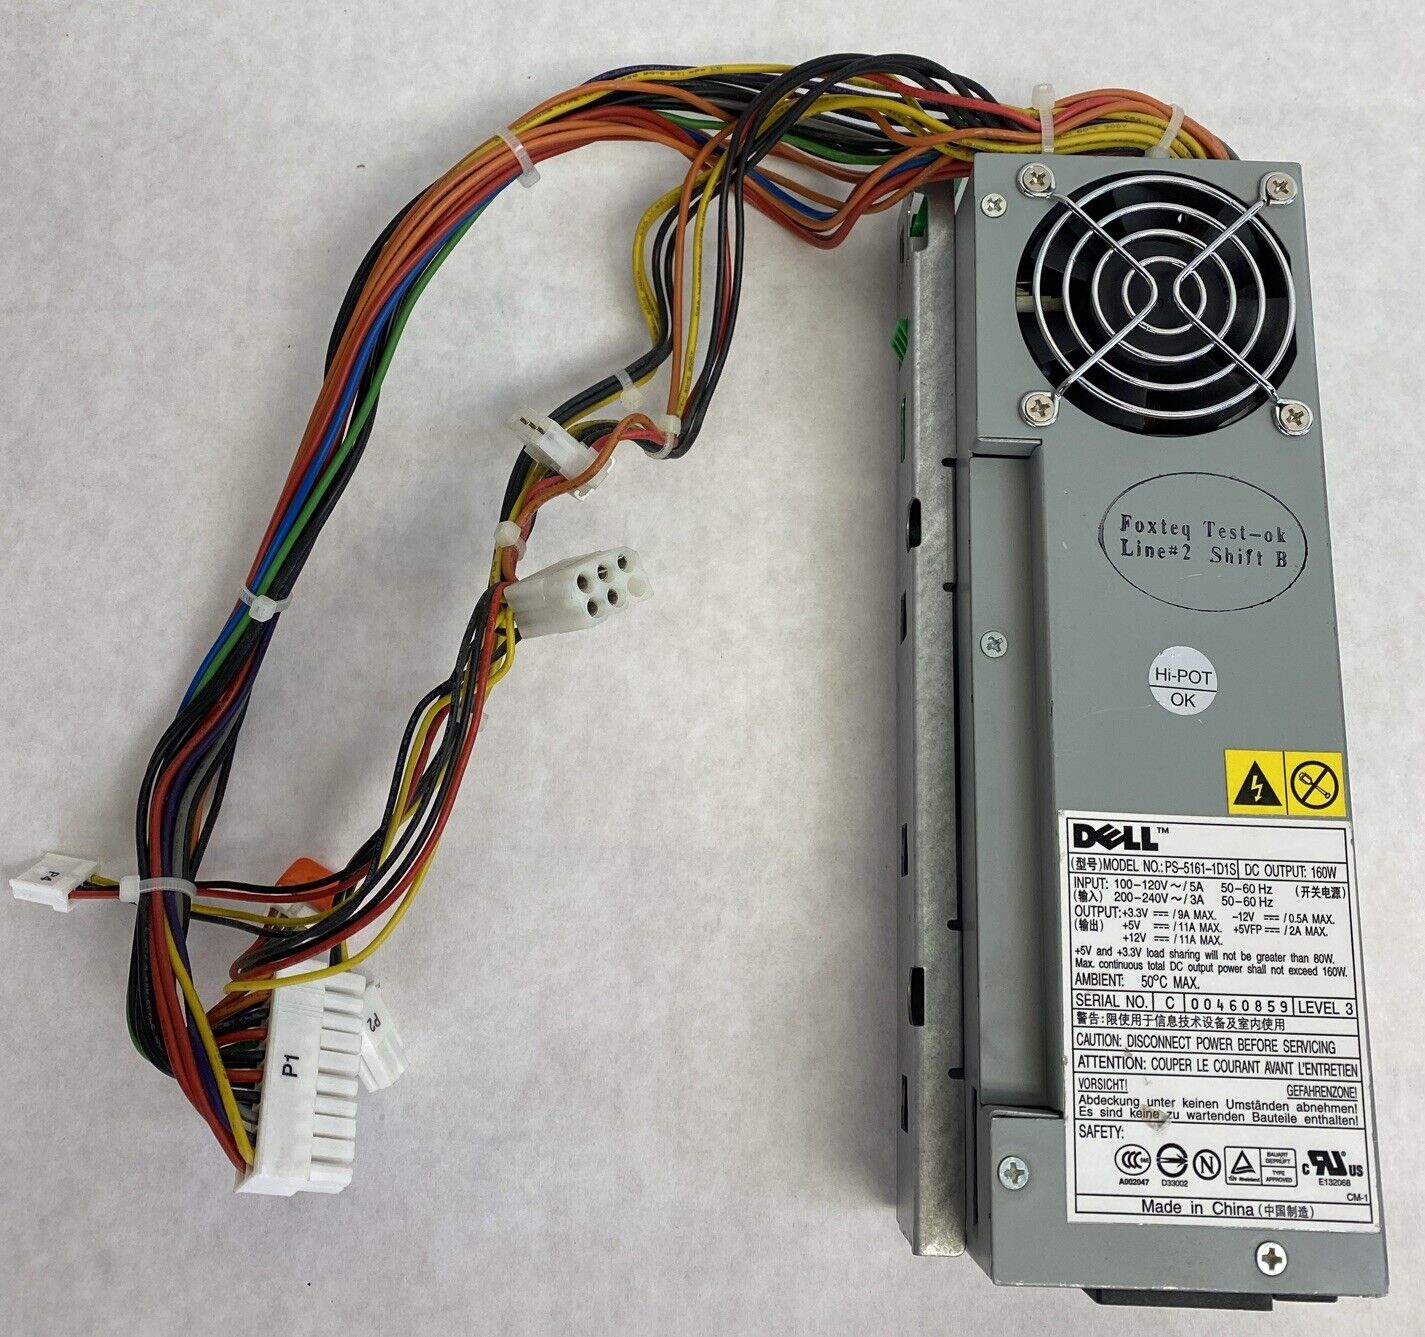 Dell 03Y147 PS-5161-1D1S SFF 160W Power Supply Bracket 5G817 for Dimension 4600C